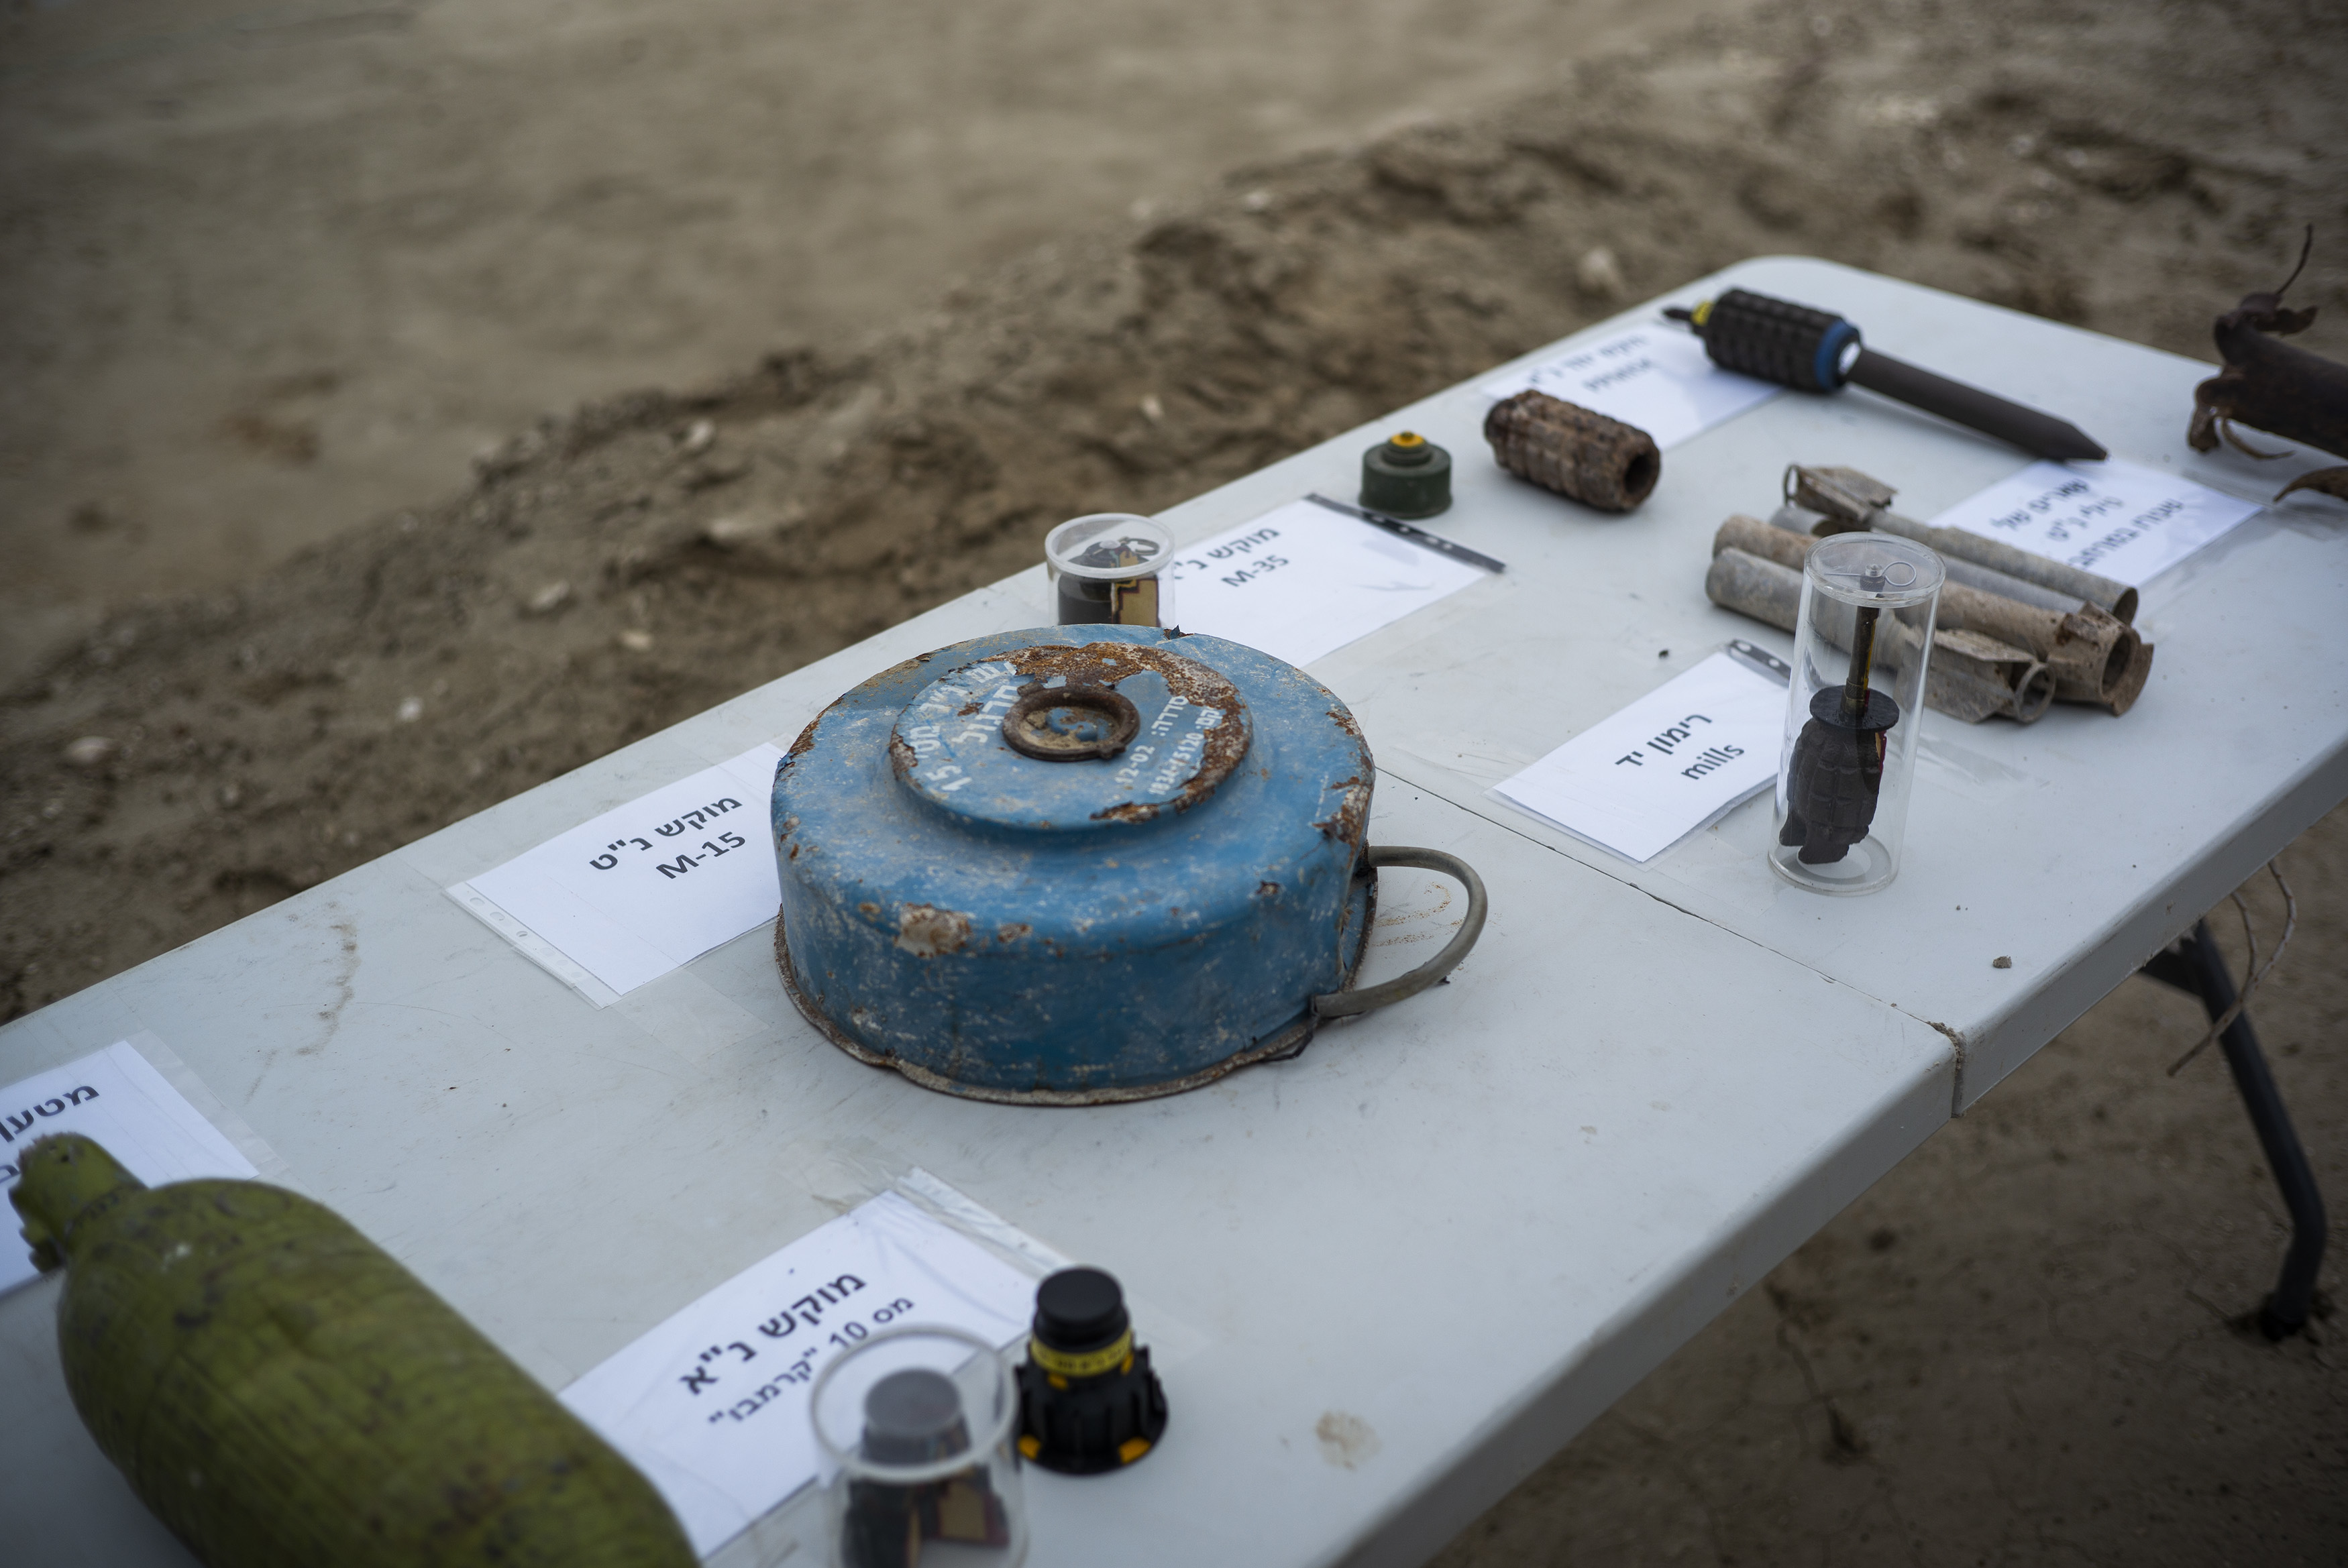 09 December 2018, Palestinian Territories, Jericho: Explosive devices that were found at the area of Qasr al-Yahud 